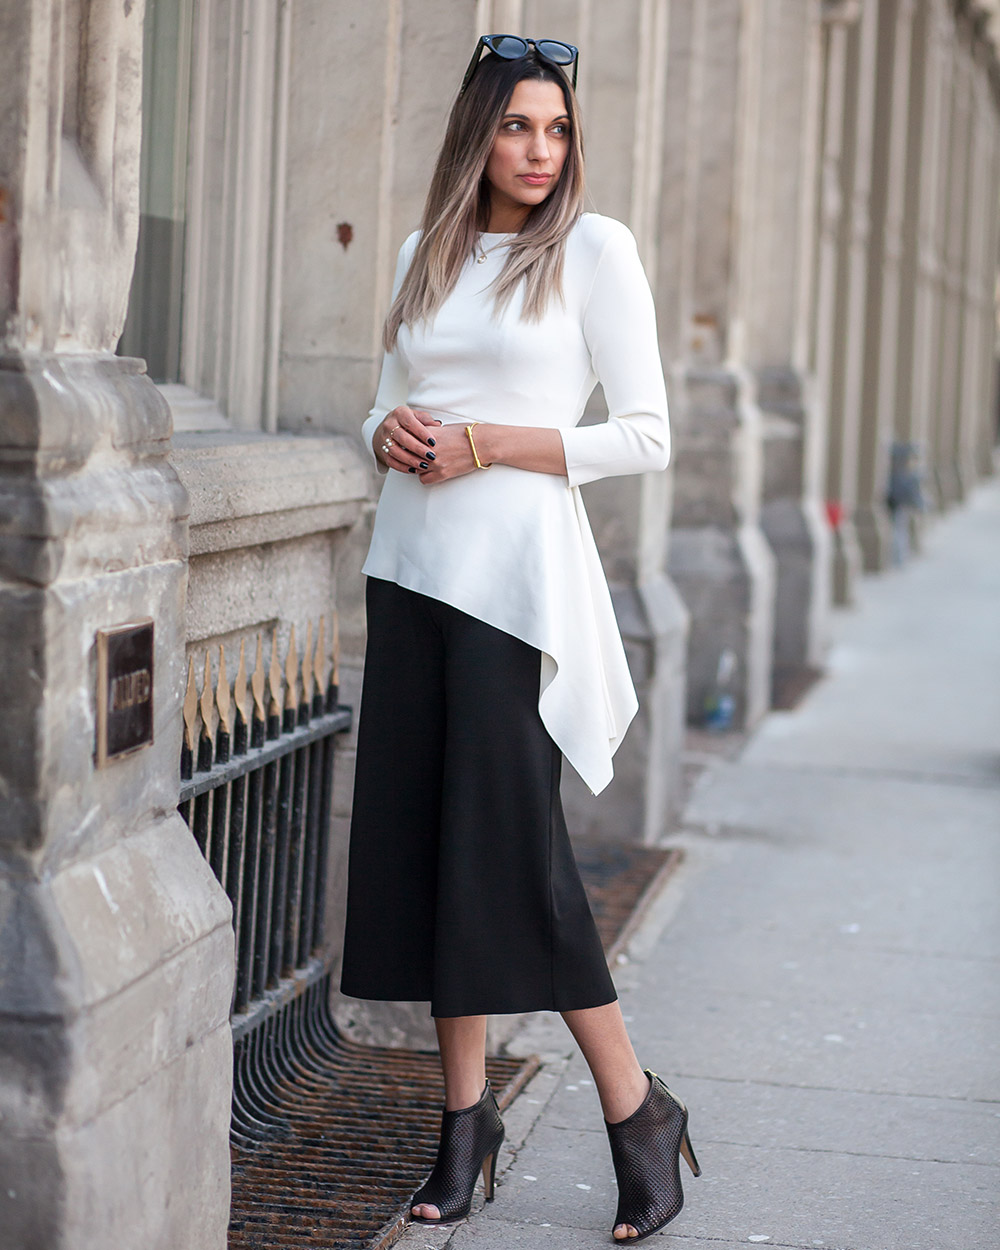 Zara, How to style black and white, Chic in monochrome, Style blogger, influencer in style, Loosing pregnancy weight